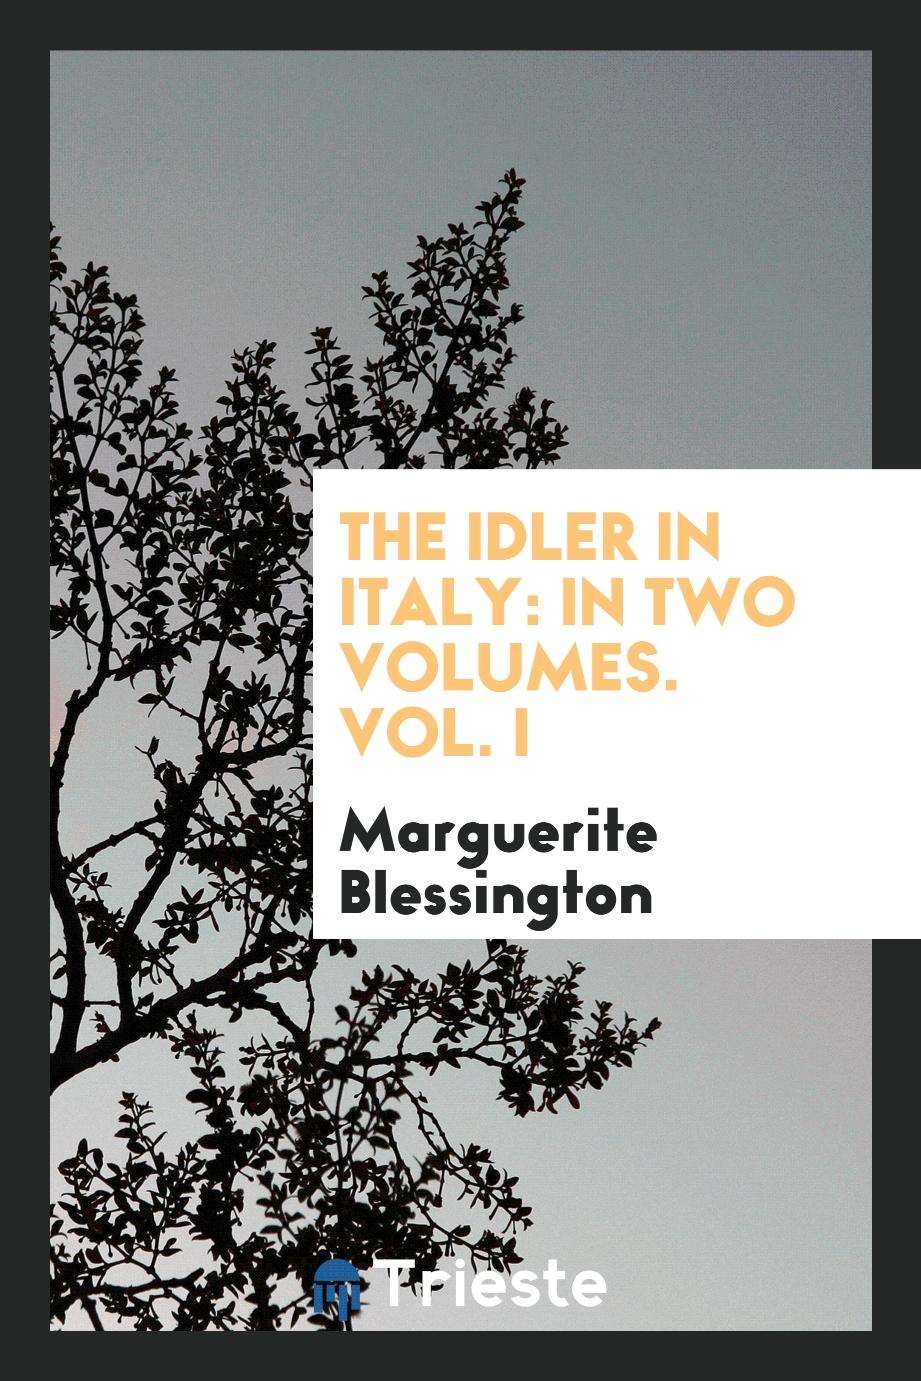 The Idler in Italy: In Two Volumes. Vol. I